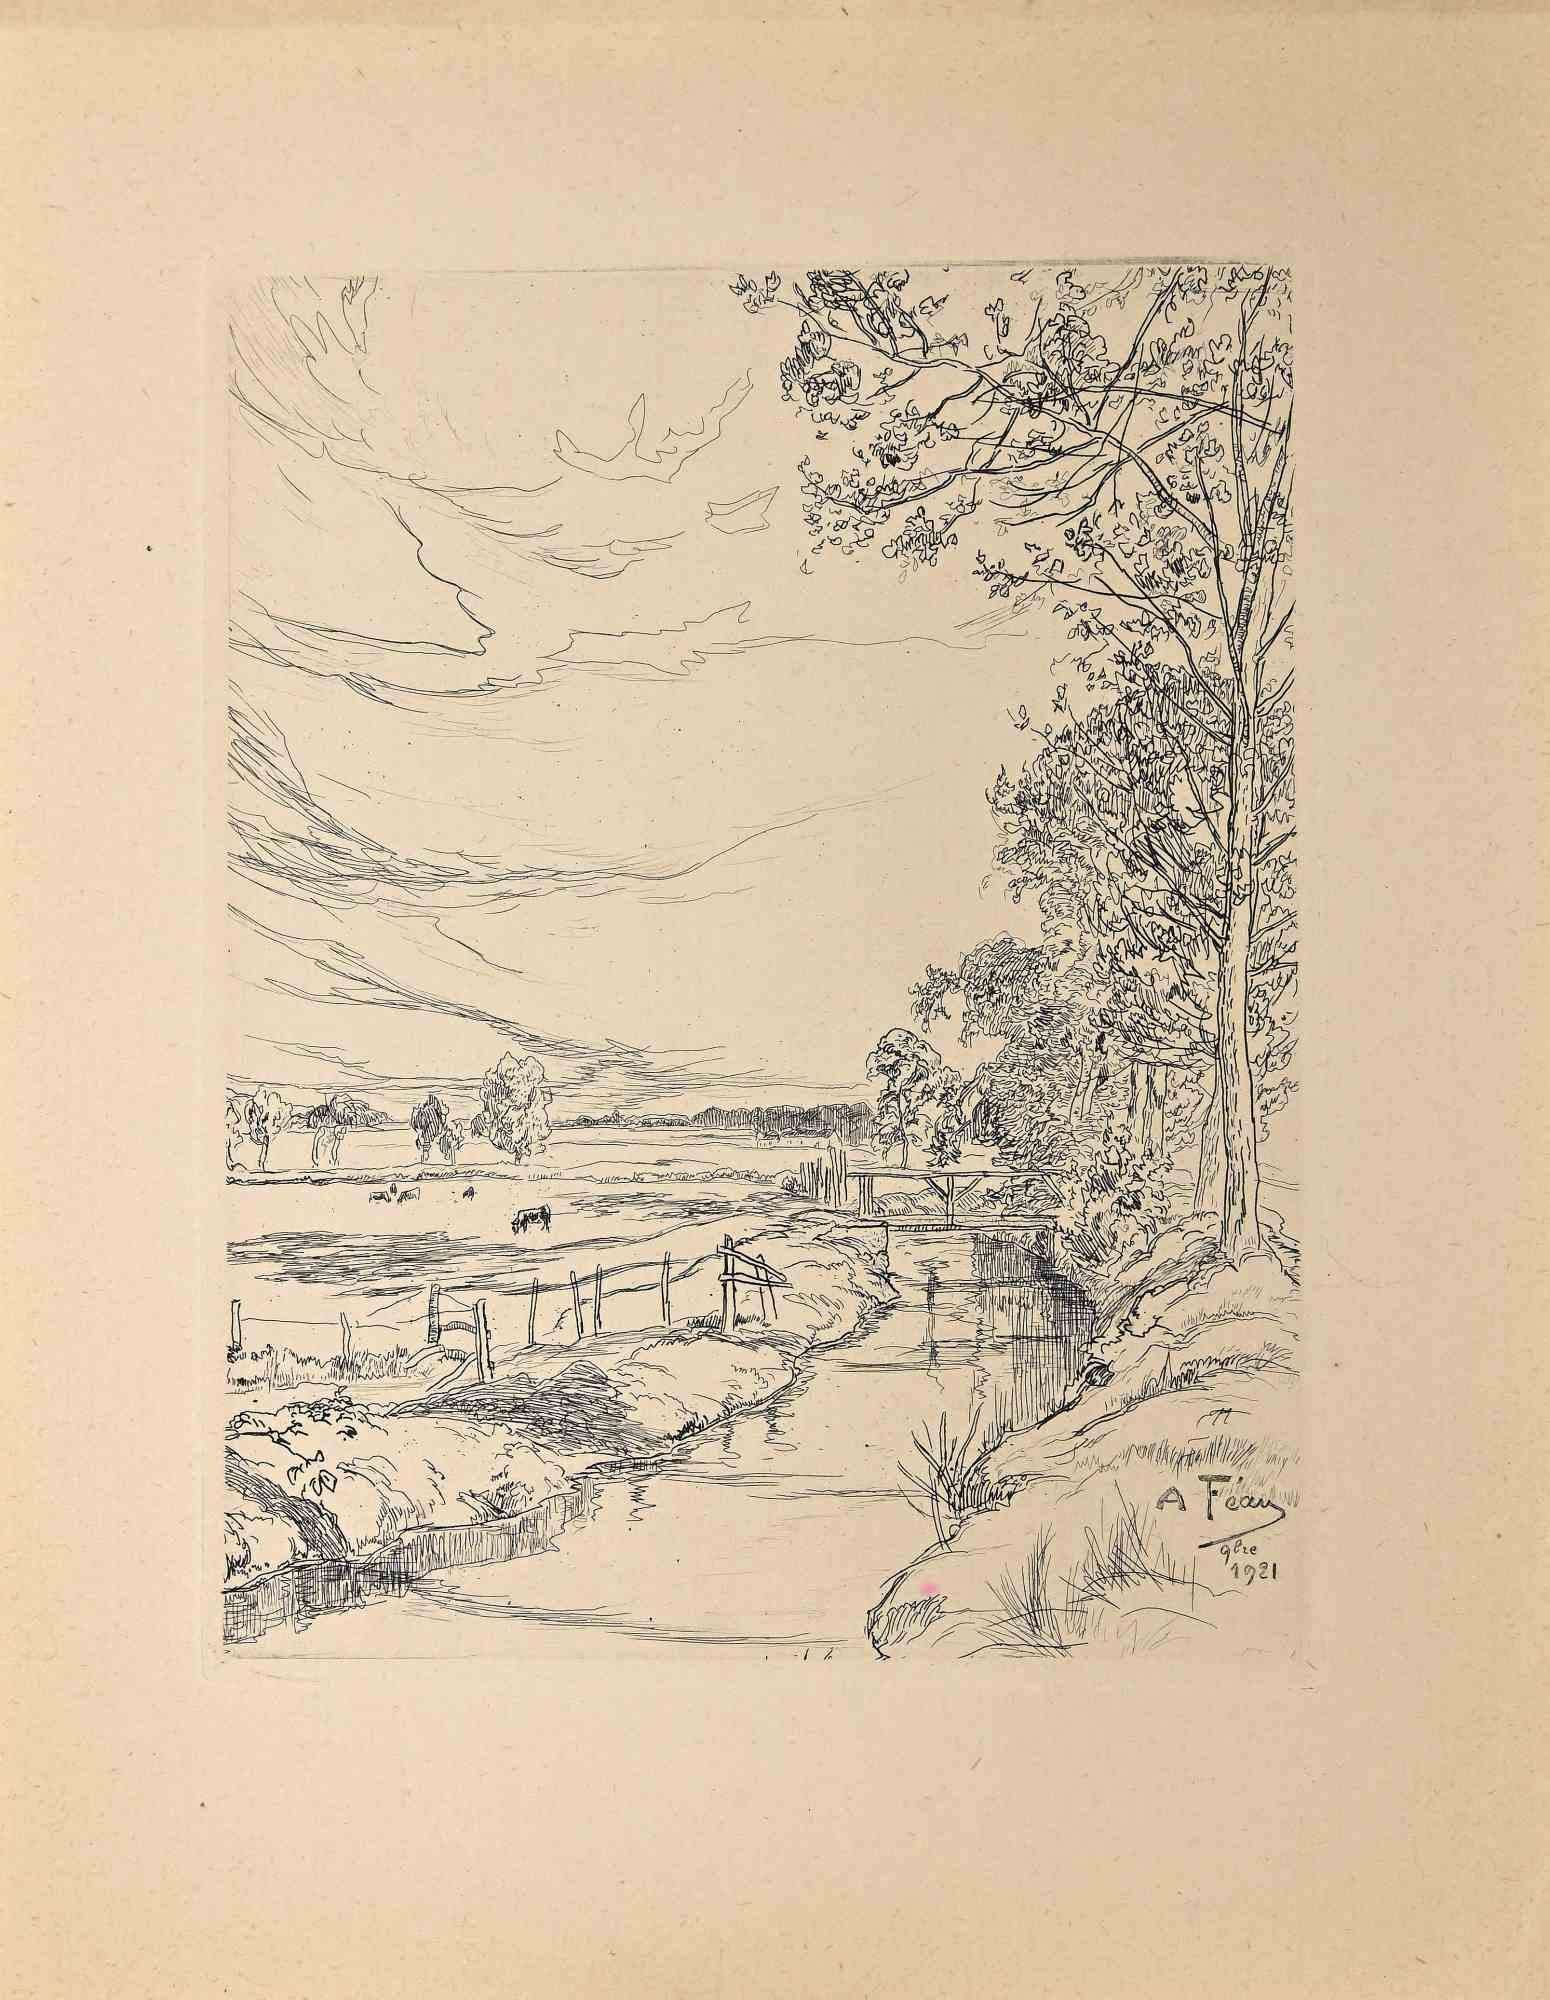 The River By Meadow - Original Etching by Amadée Feau - 1921